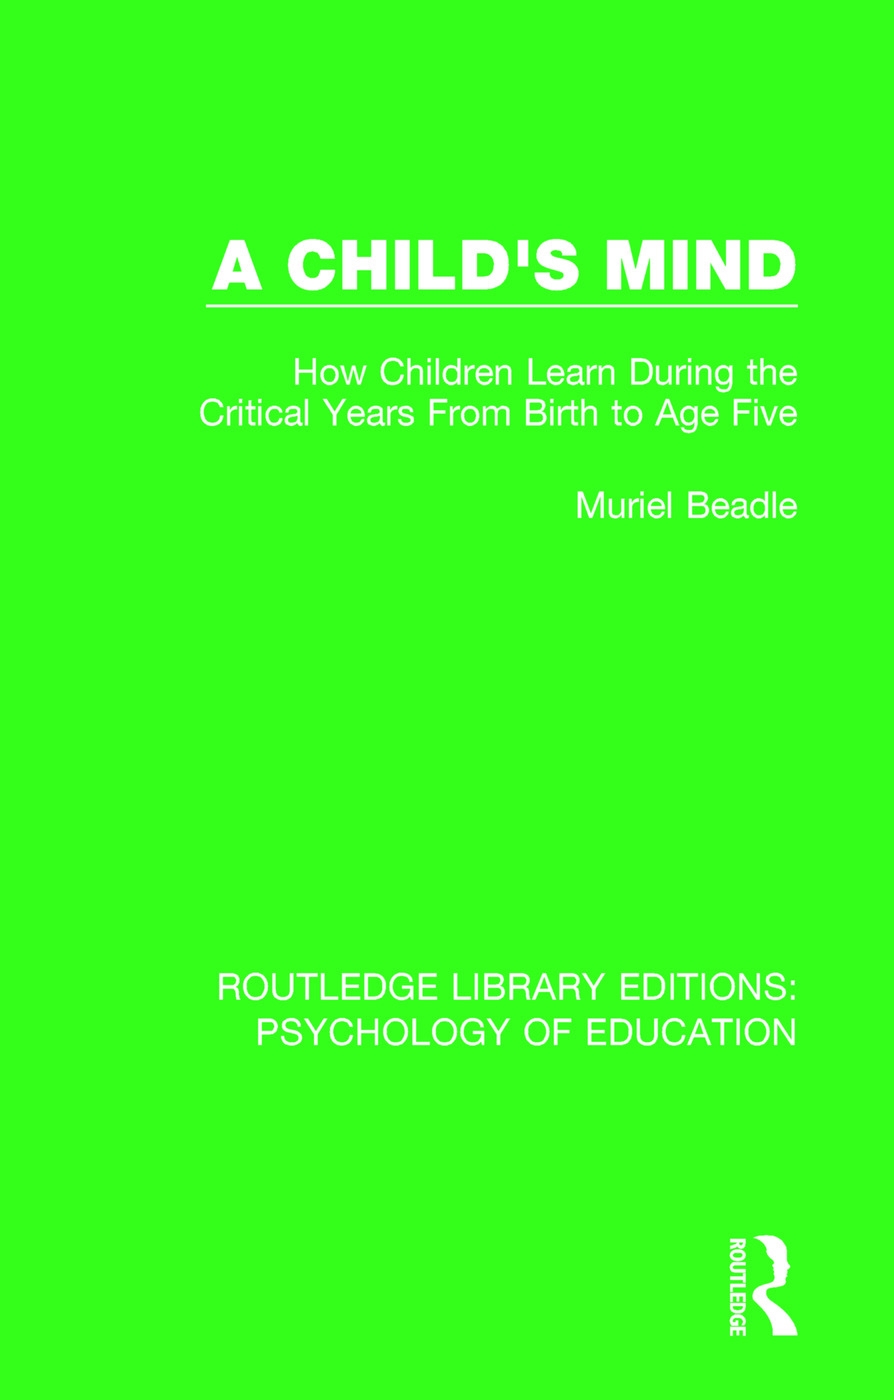 A Child’s Mind: How Children Learn During the Critical Years from Birth to Age Five